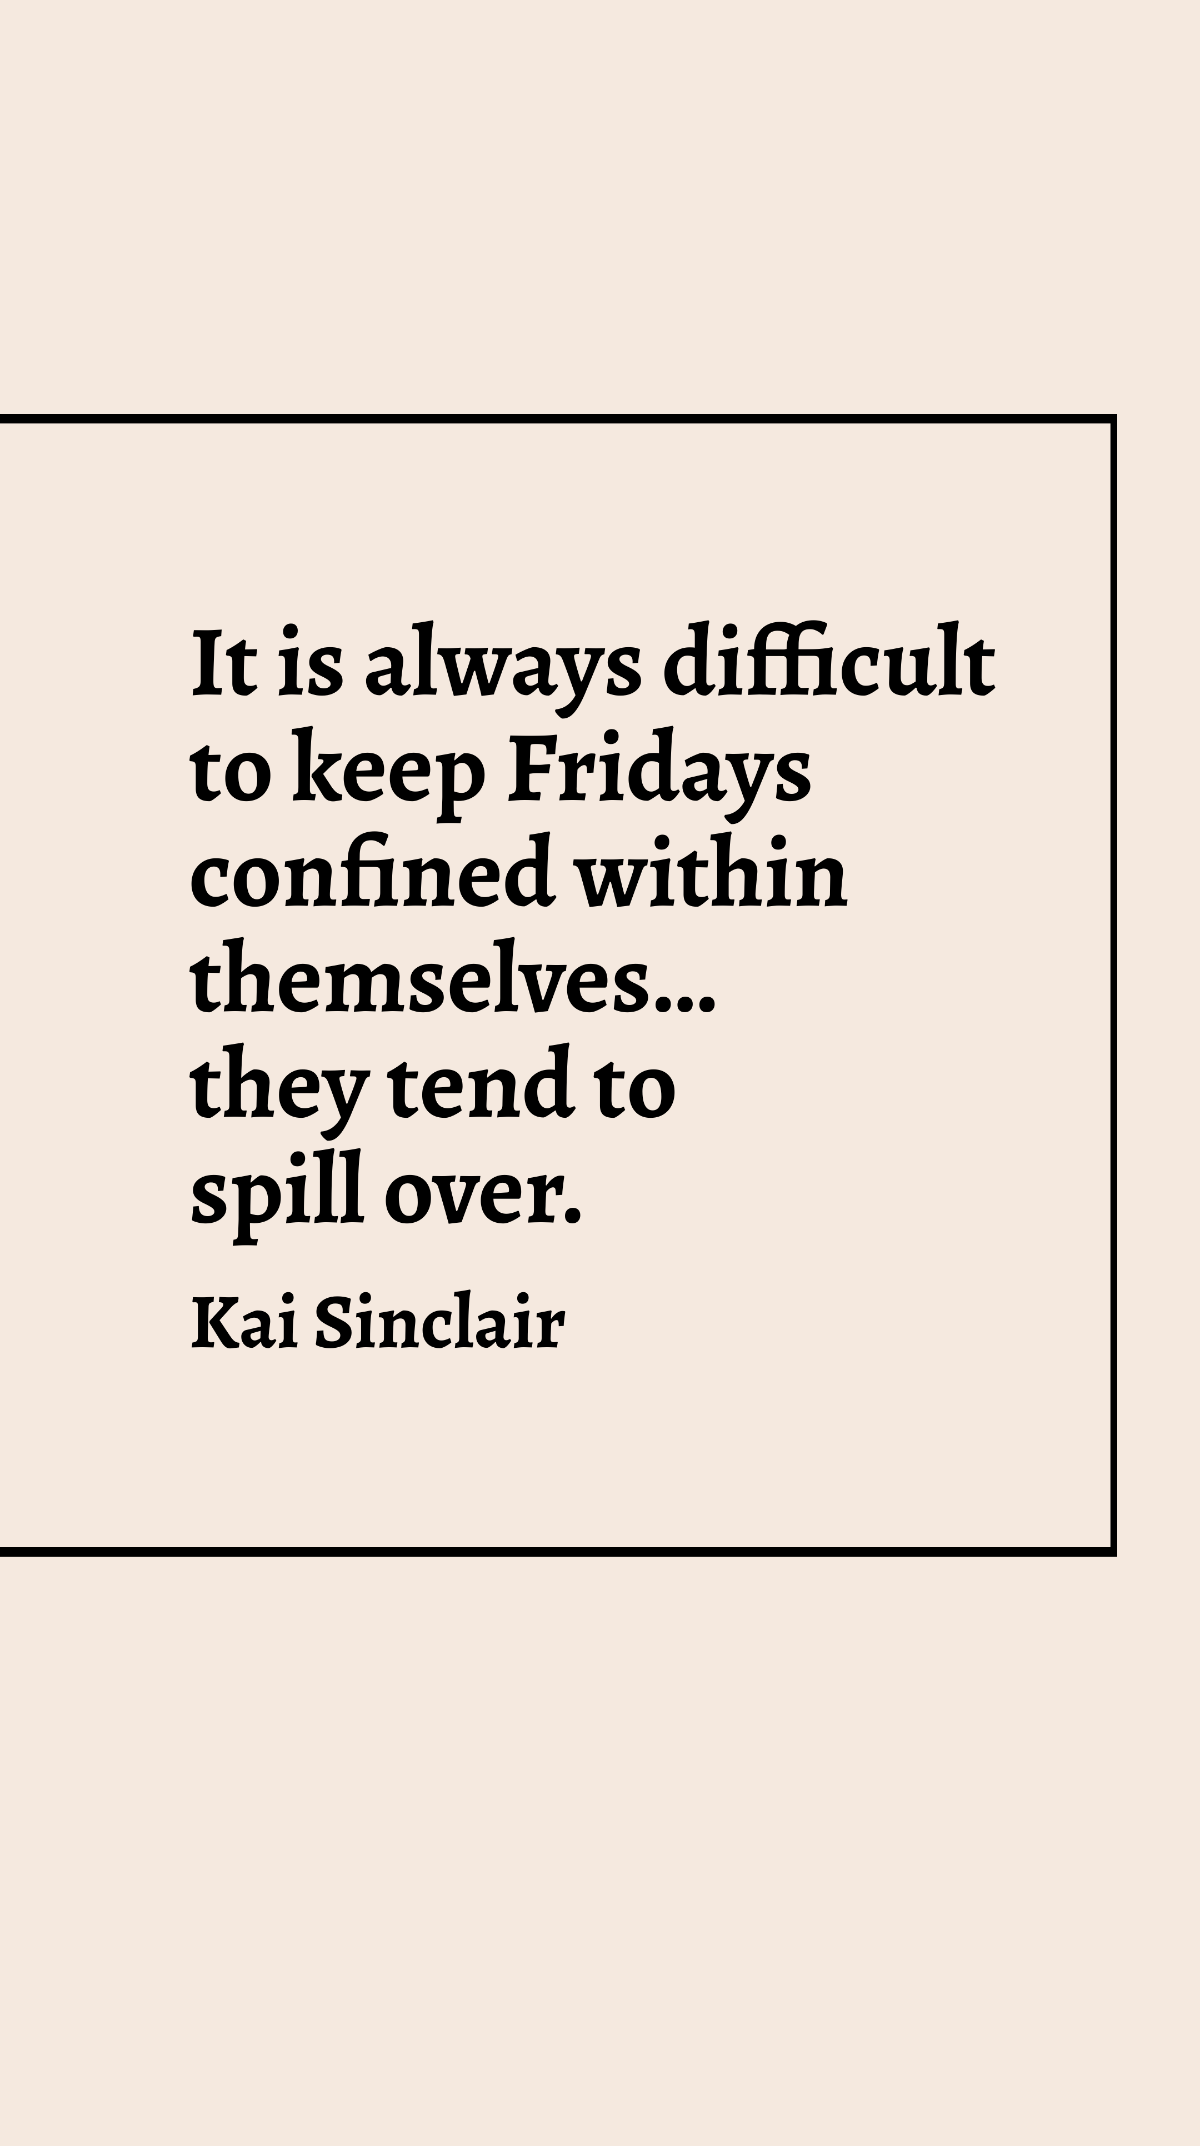 Kai Sinclair - It is always difficult to keep Fridays confined within themselves…they tend to spill over. Template